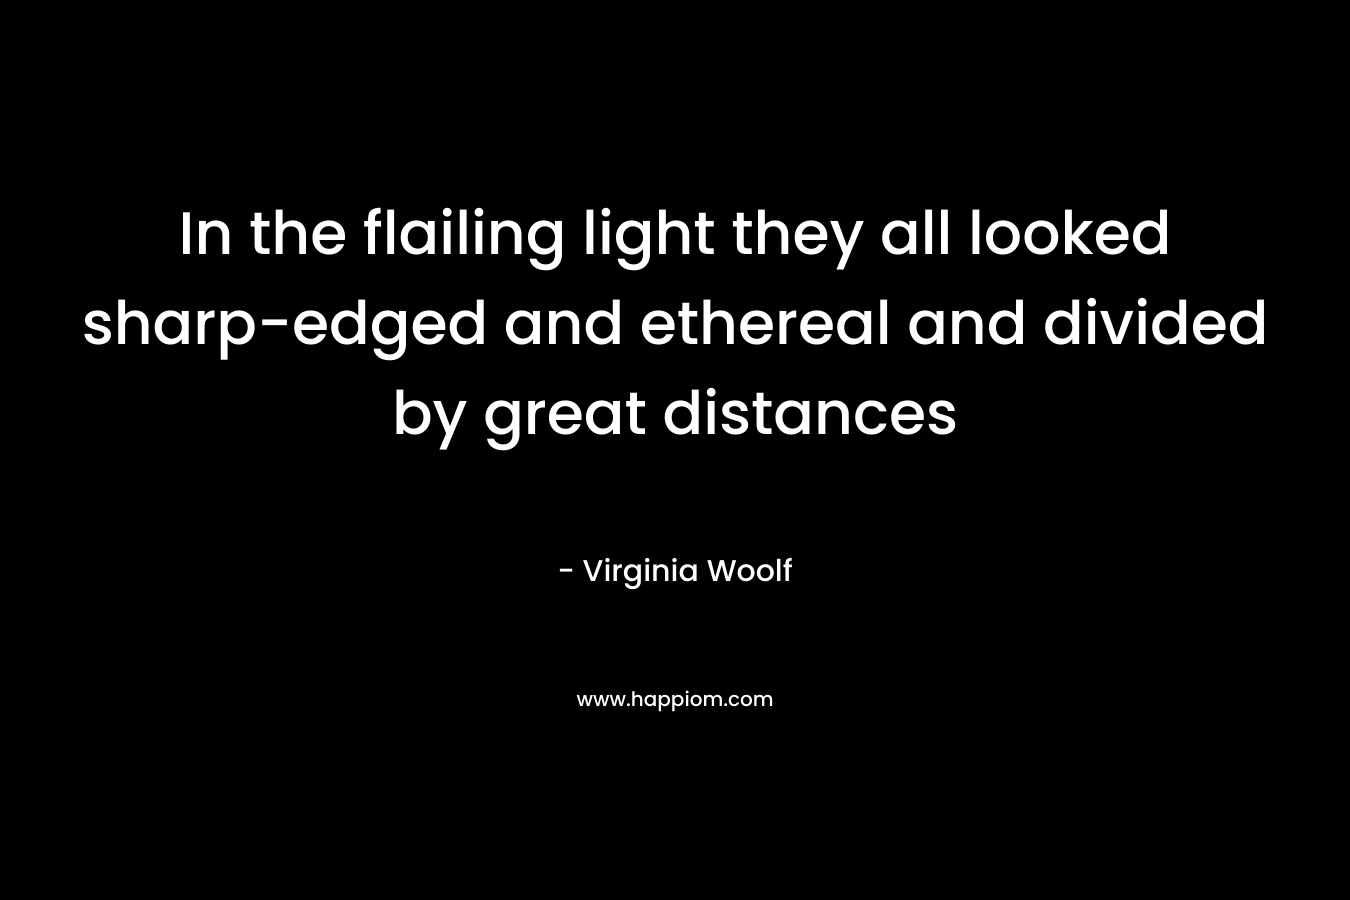 In the flailing light they all looked sharp-edged and ethereal and divided by great distances